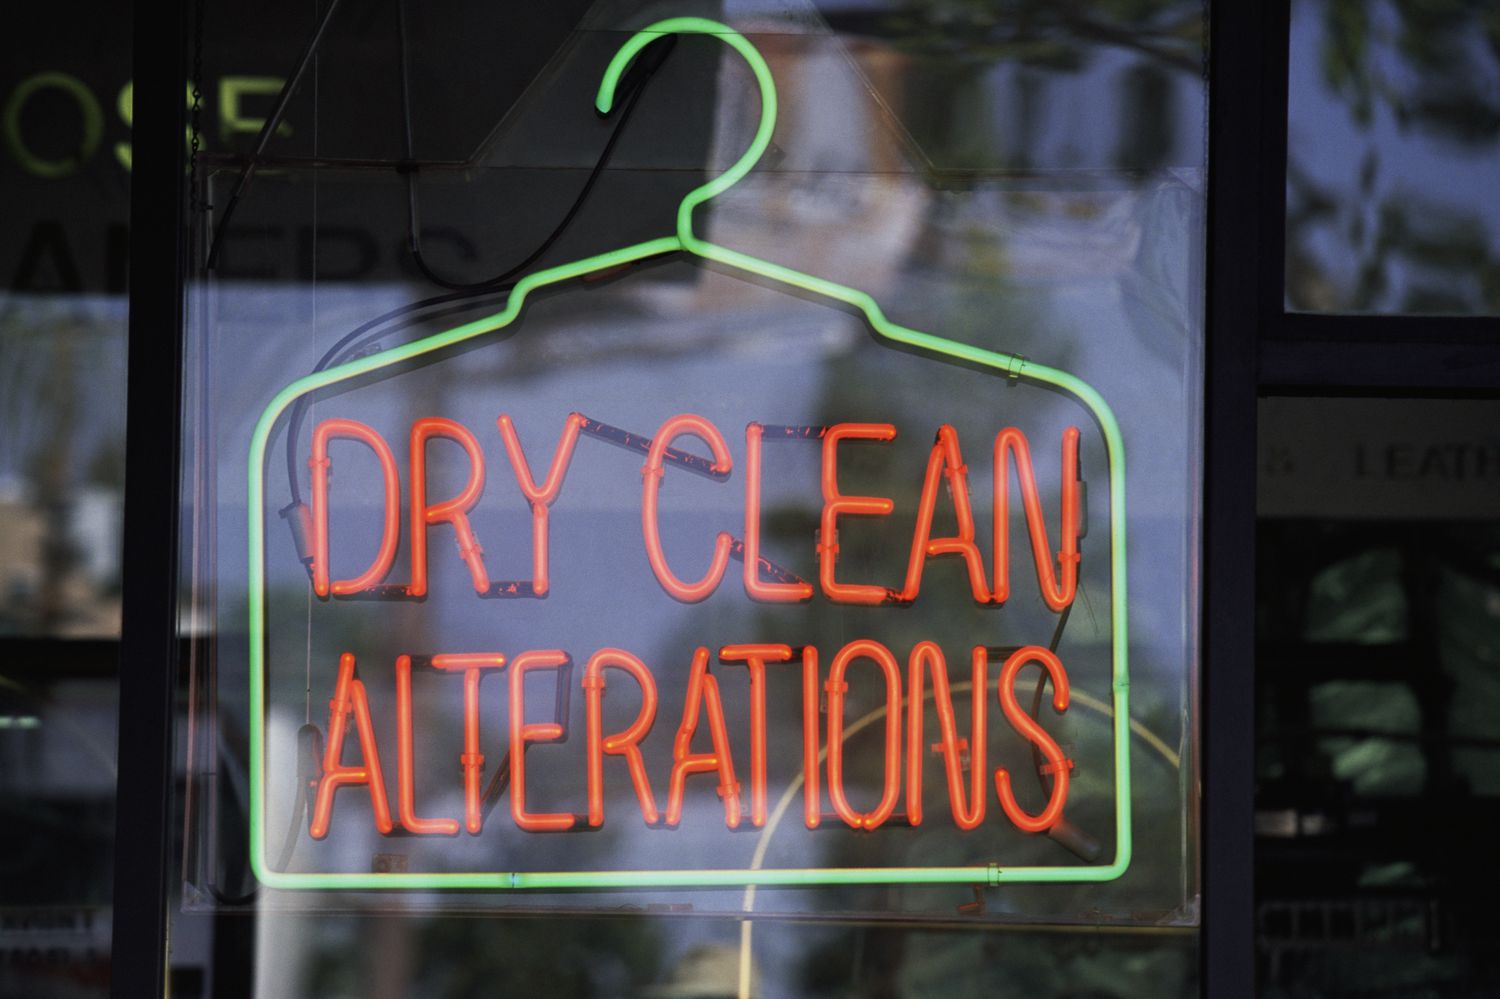 Dry Cleaning Neon Sign